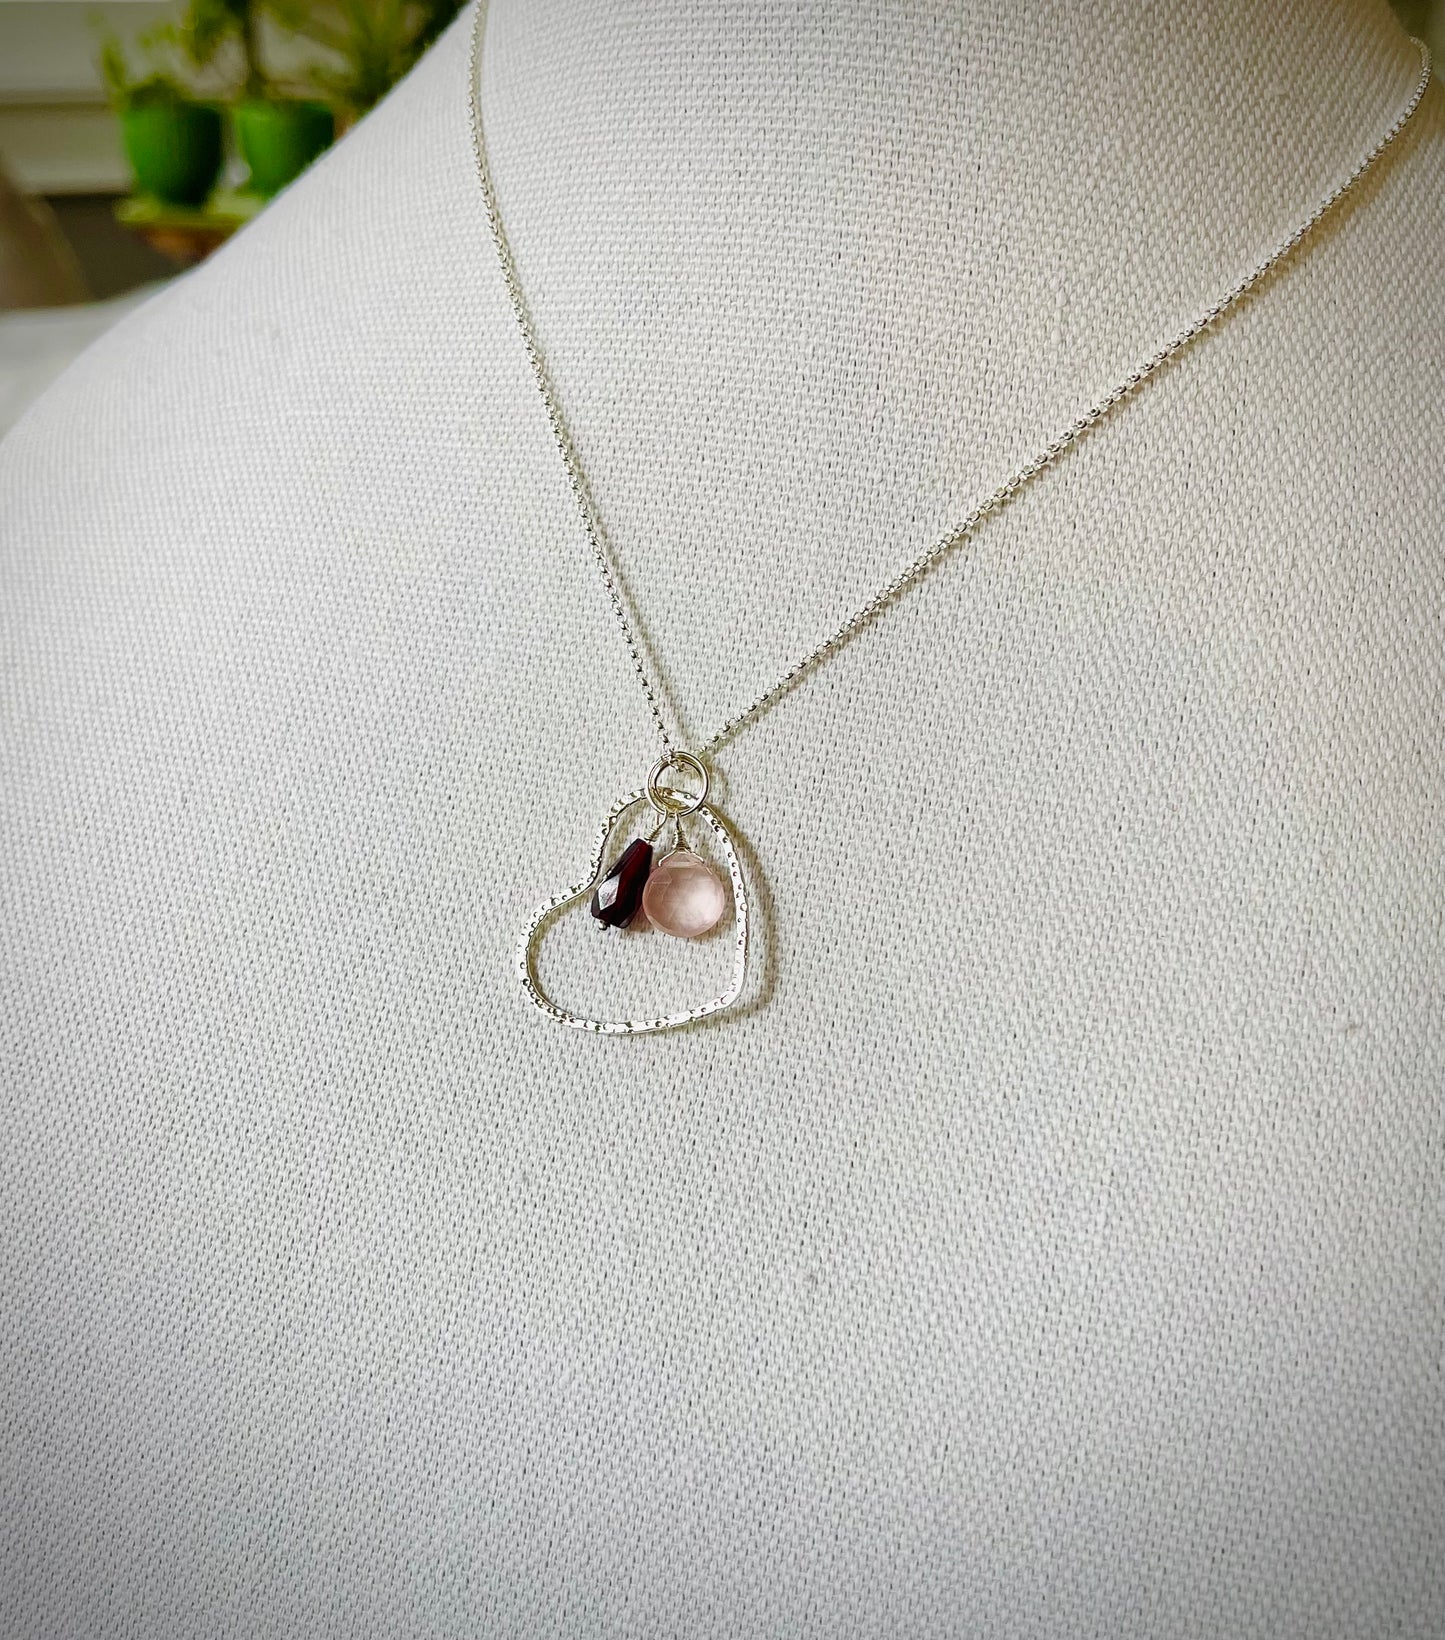 Amor necklace (convertible)